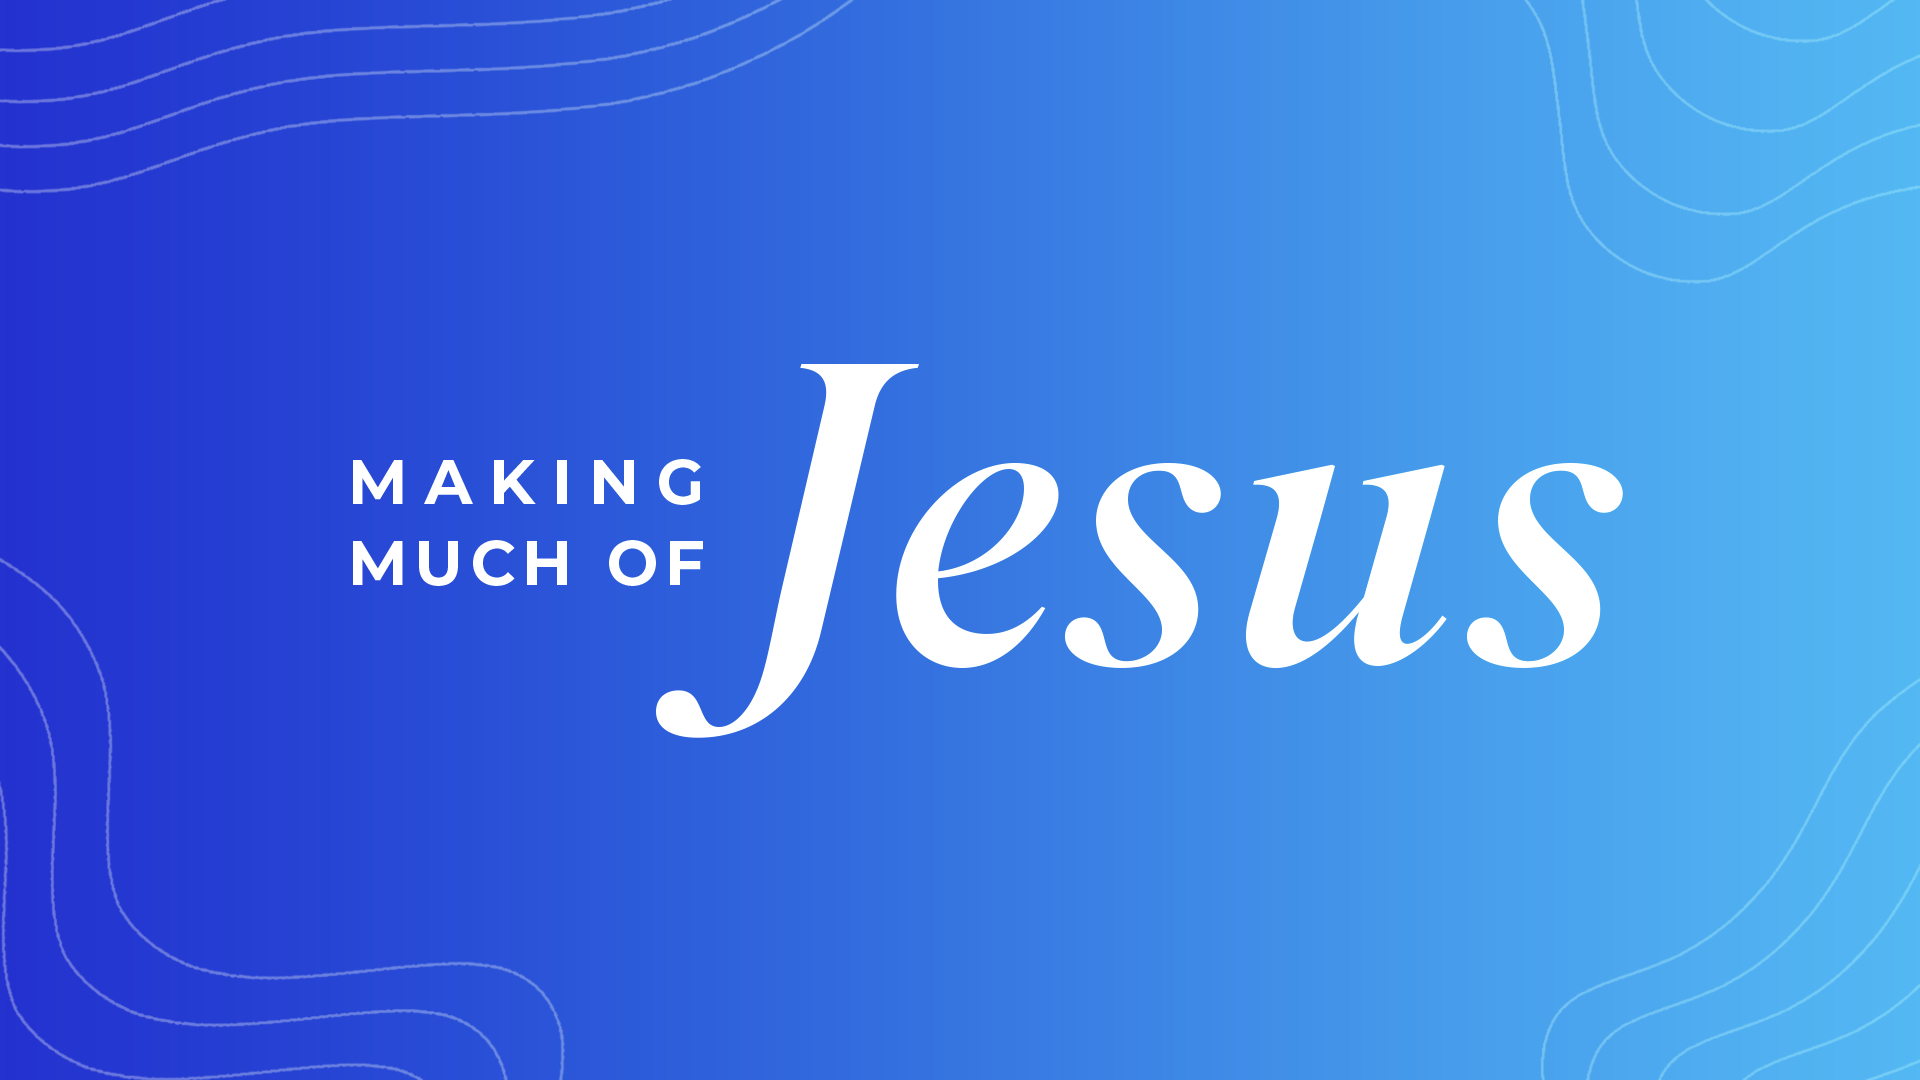 Making Much of Jesus: Family